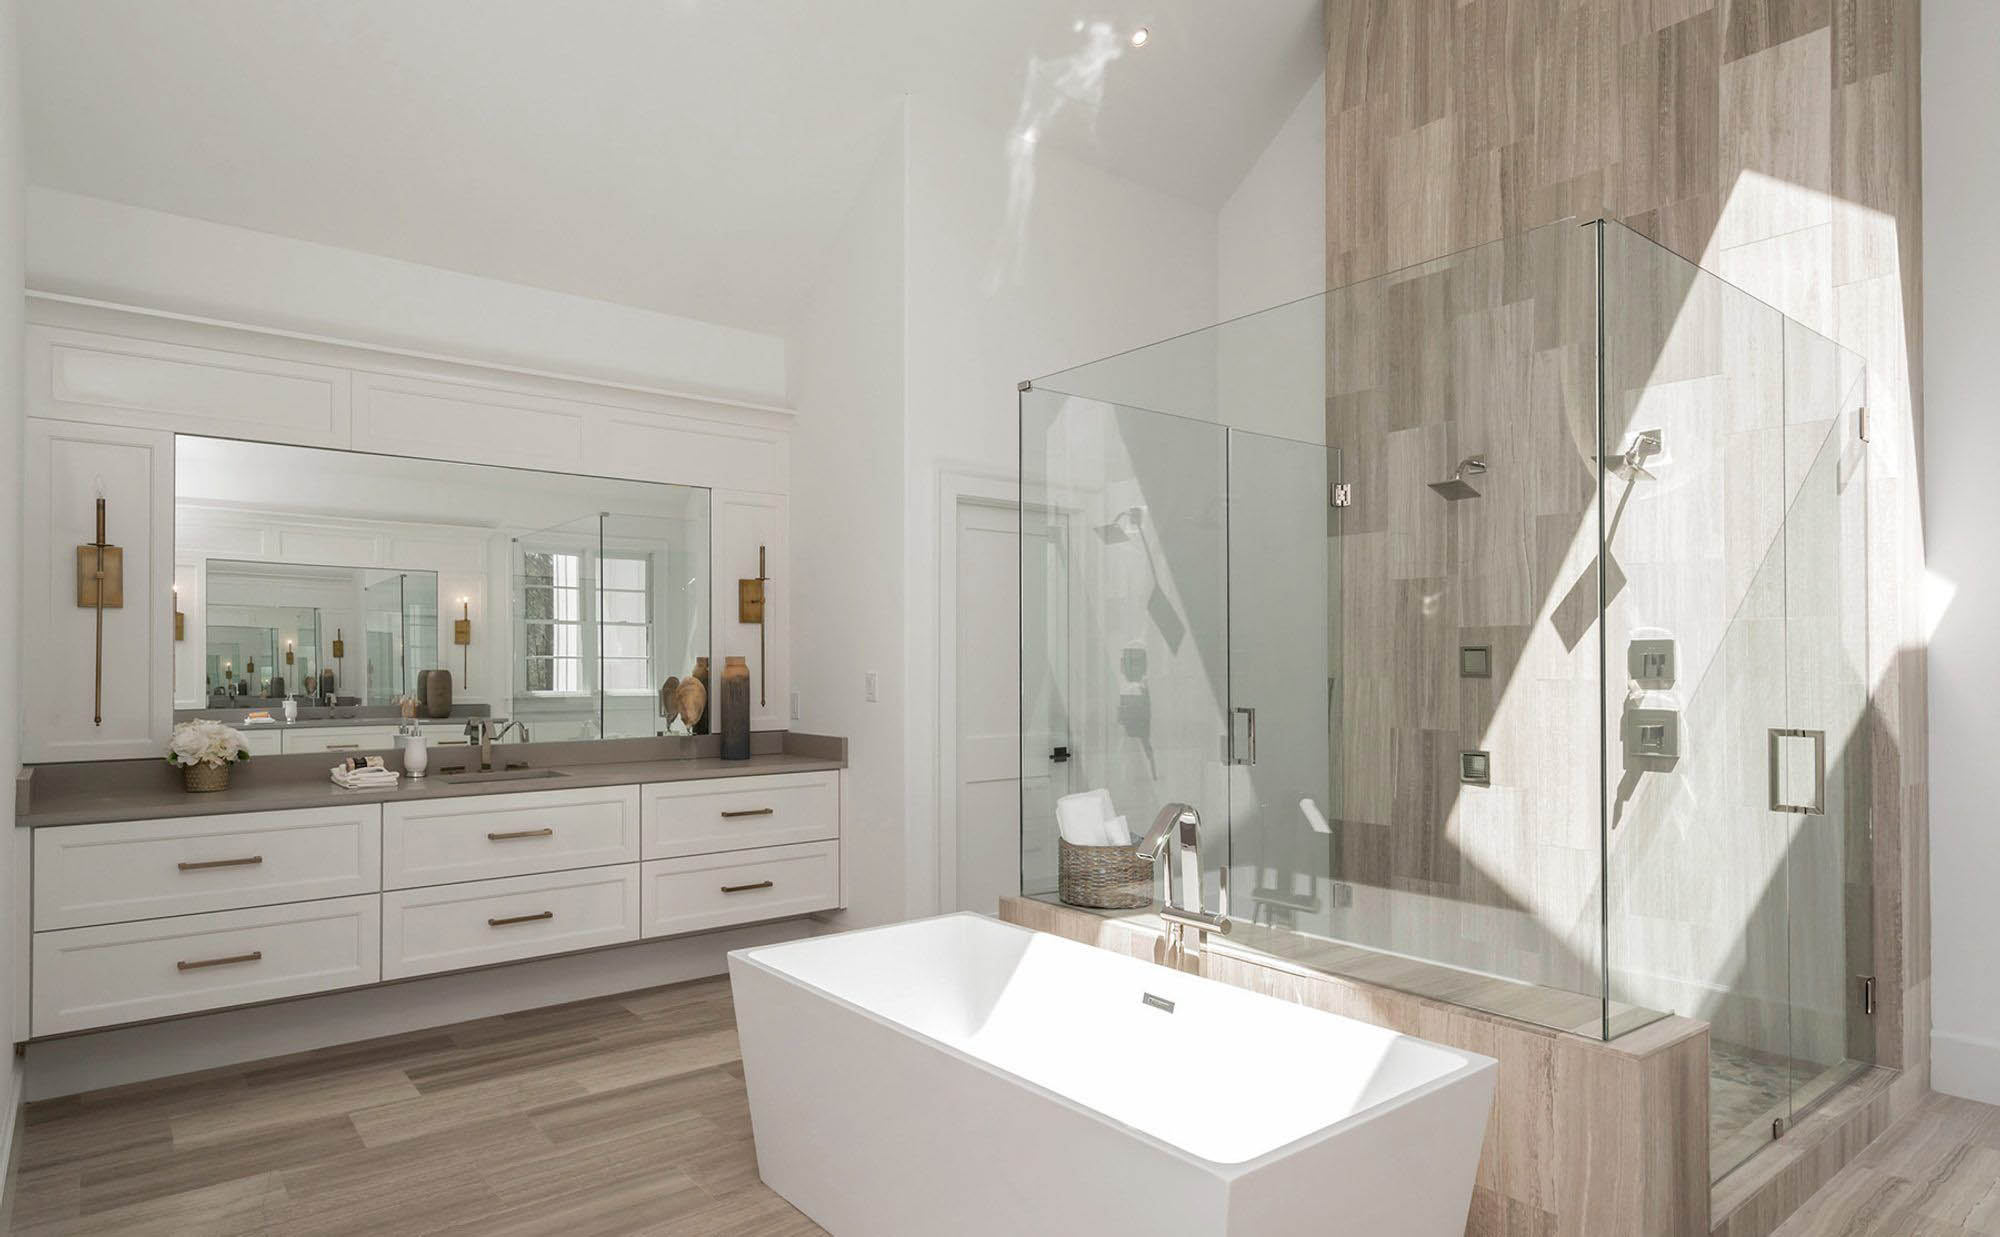 Light gray woo look bathroom floor tile with matching shower wall with glass.